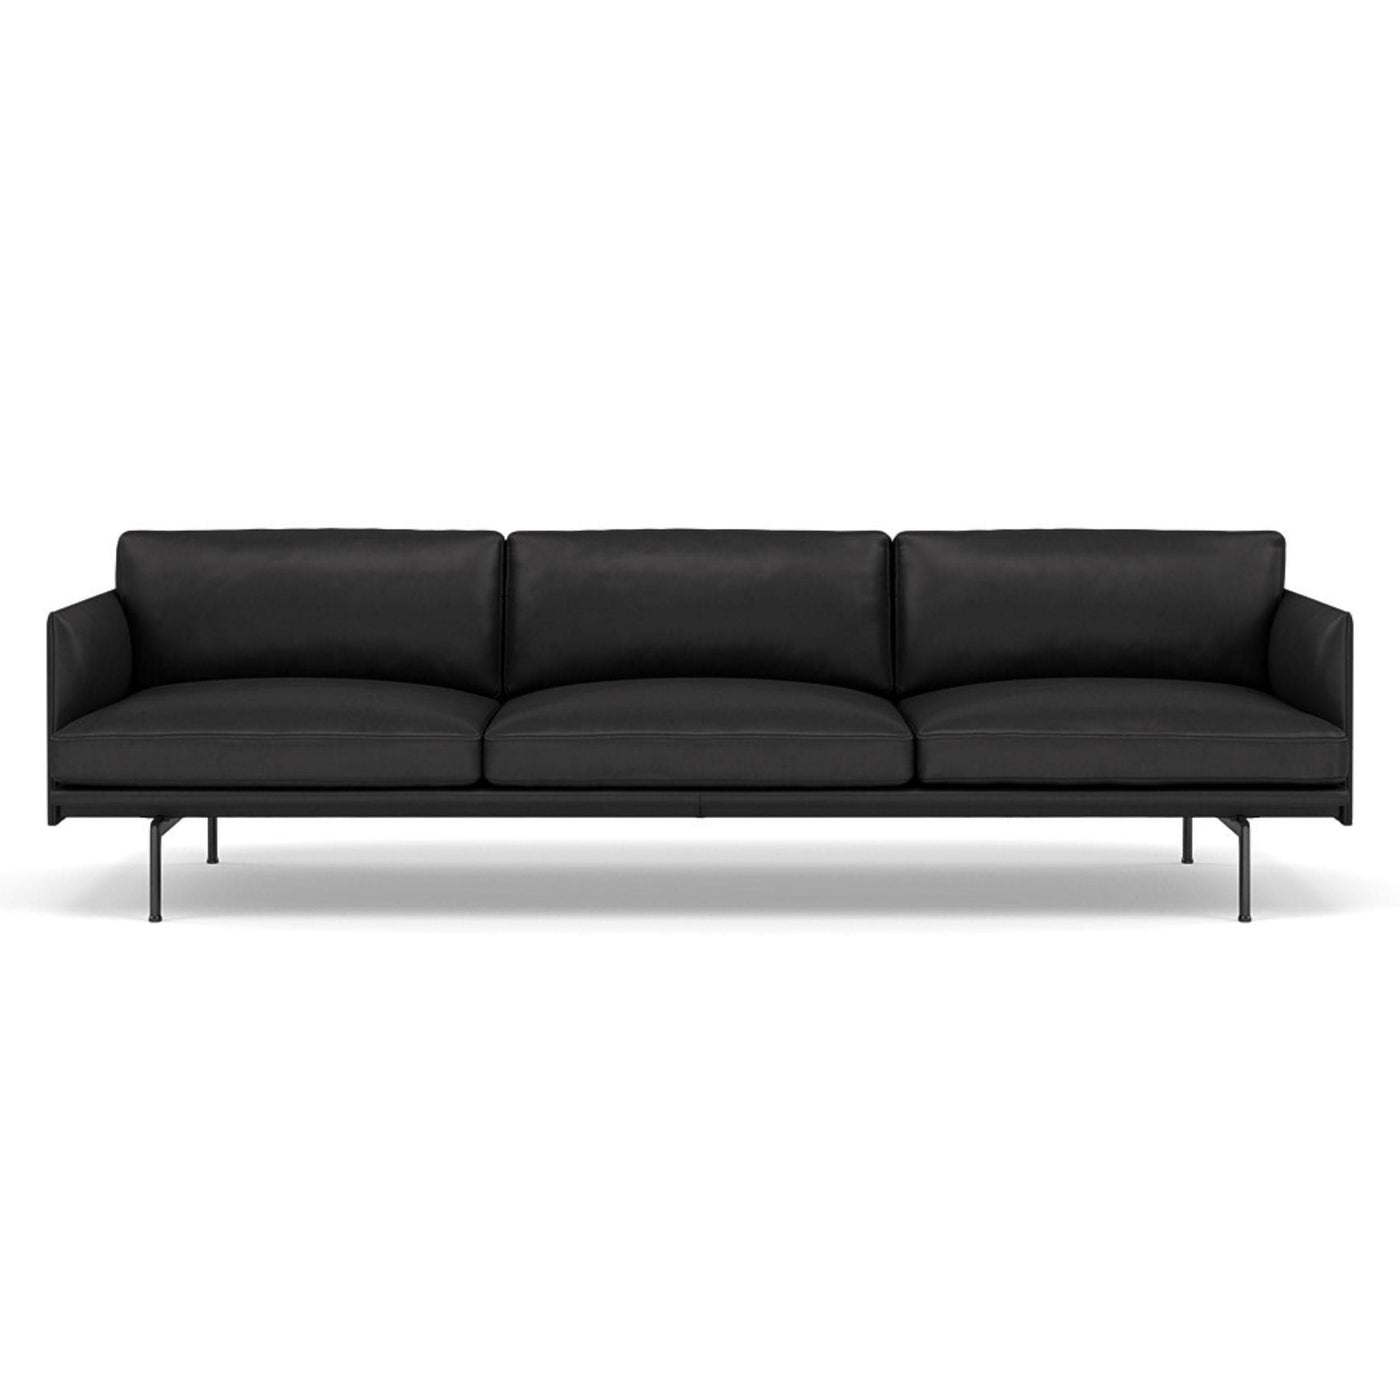 muuto outline 3.5 seater sofa in black refine leather and black legs. Made to order from someday designs. #colour_black-refine-leather